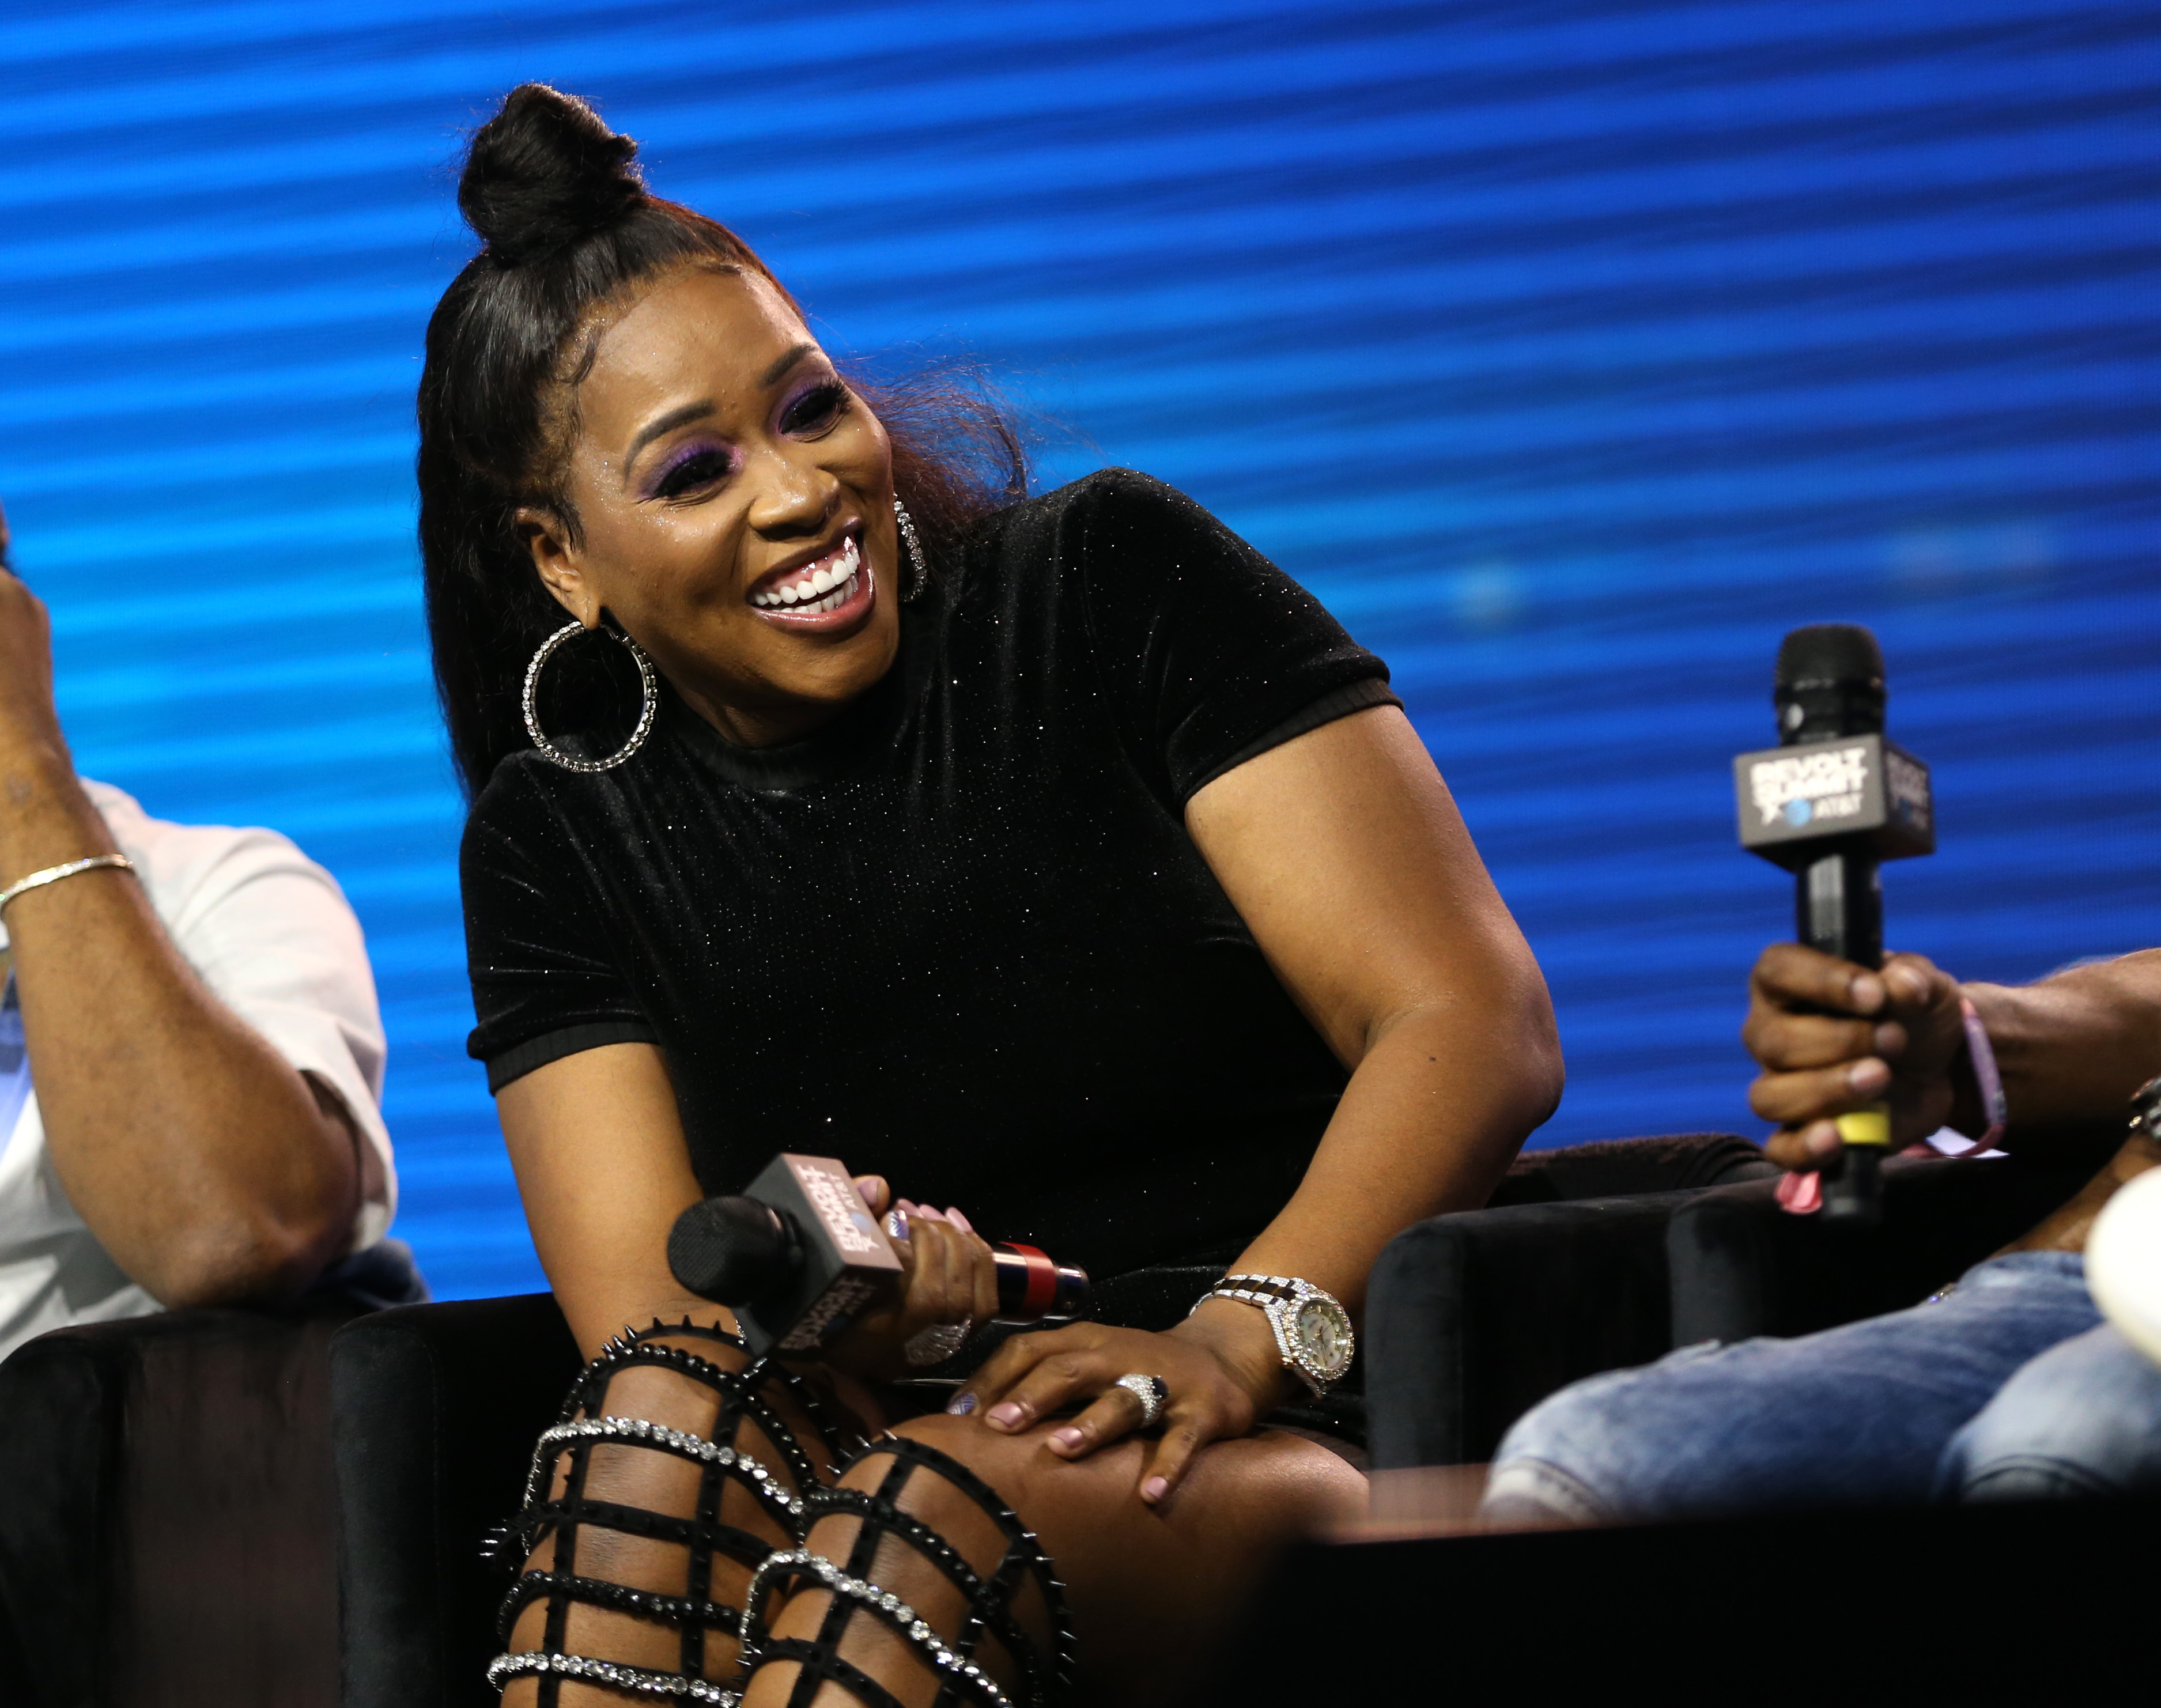 Remy Ma Says Most People Who “Think They’re Poppin'” Would Disappear Without IG